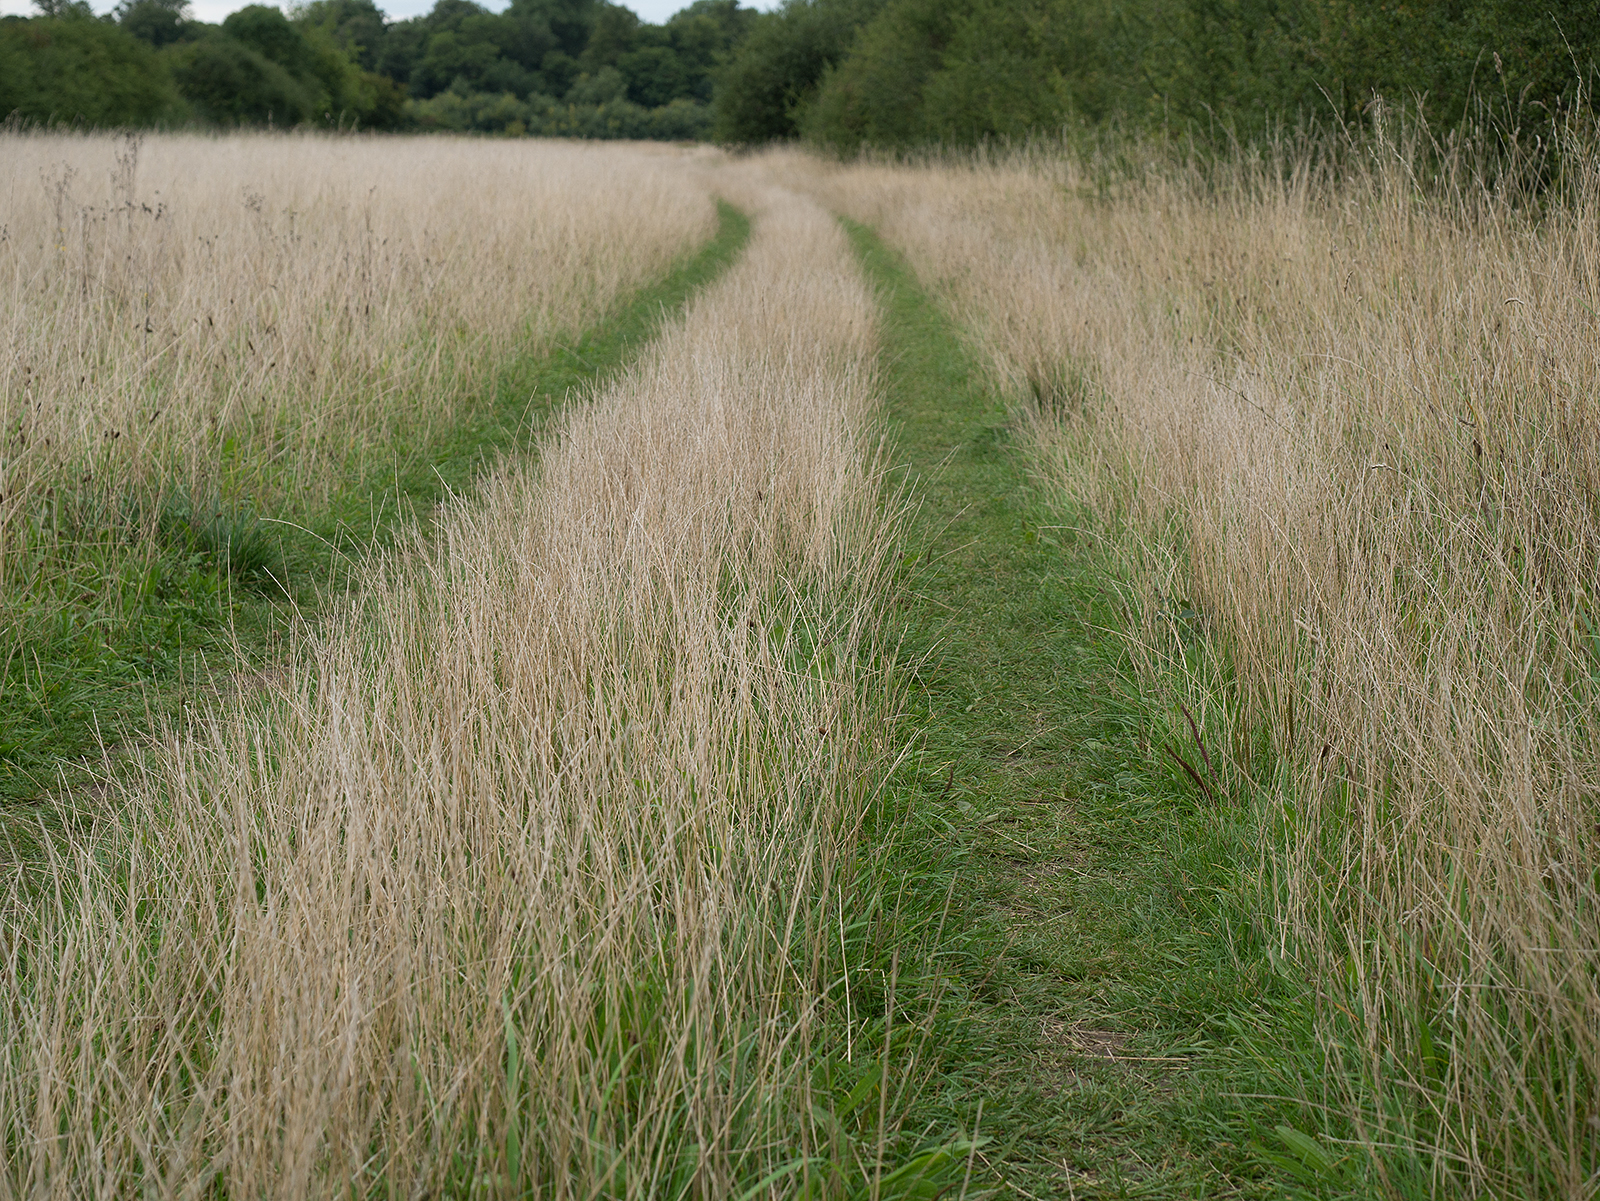 Heading north through the meadow